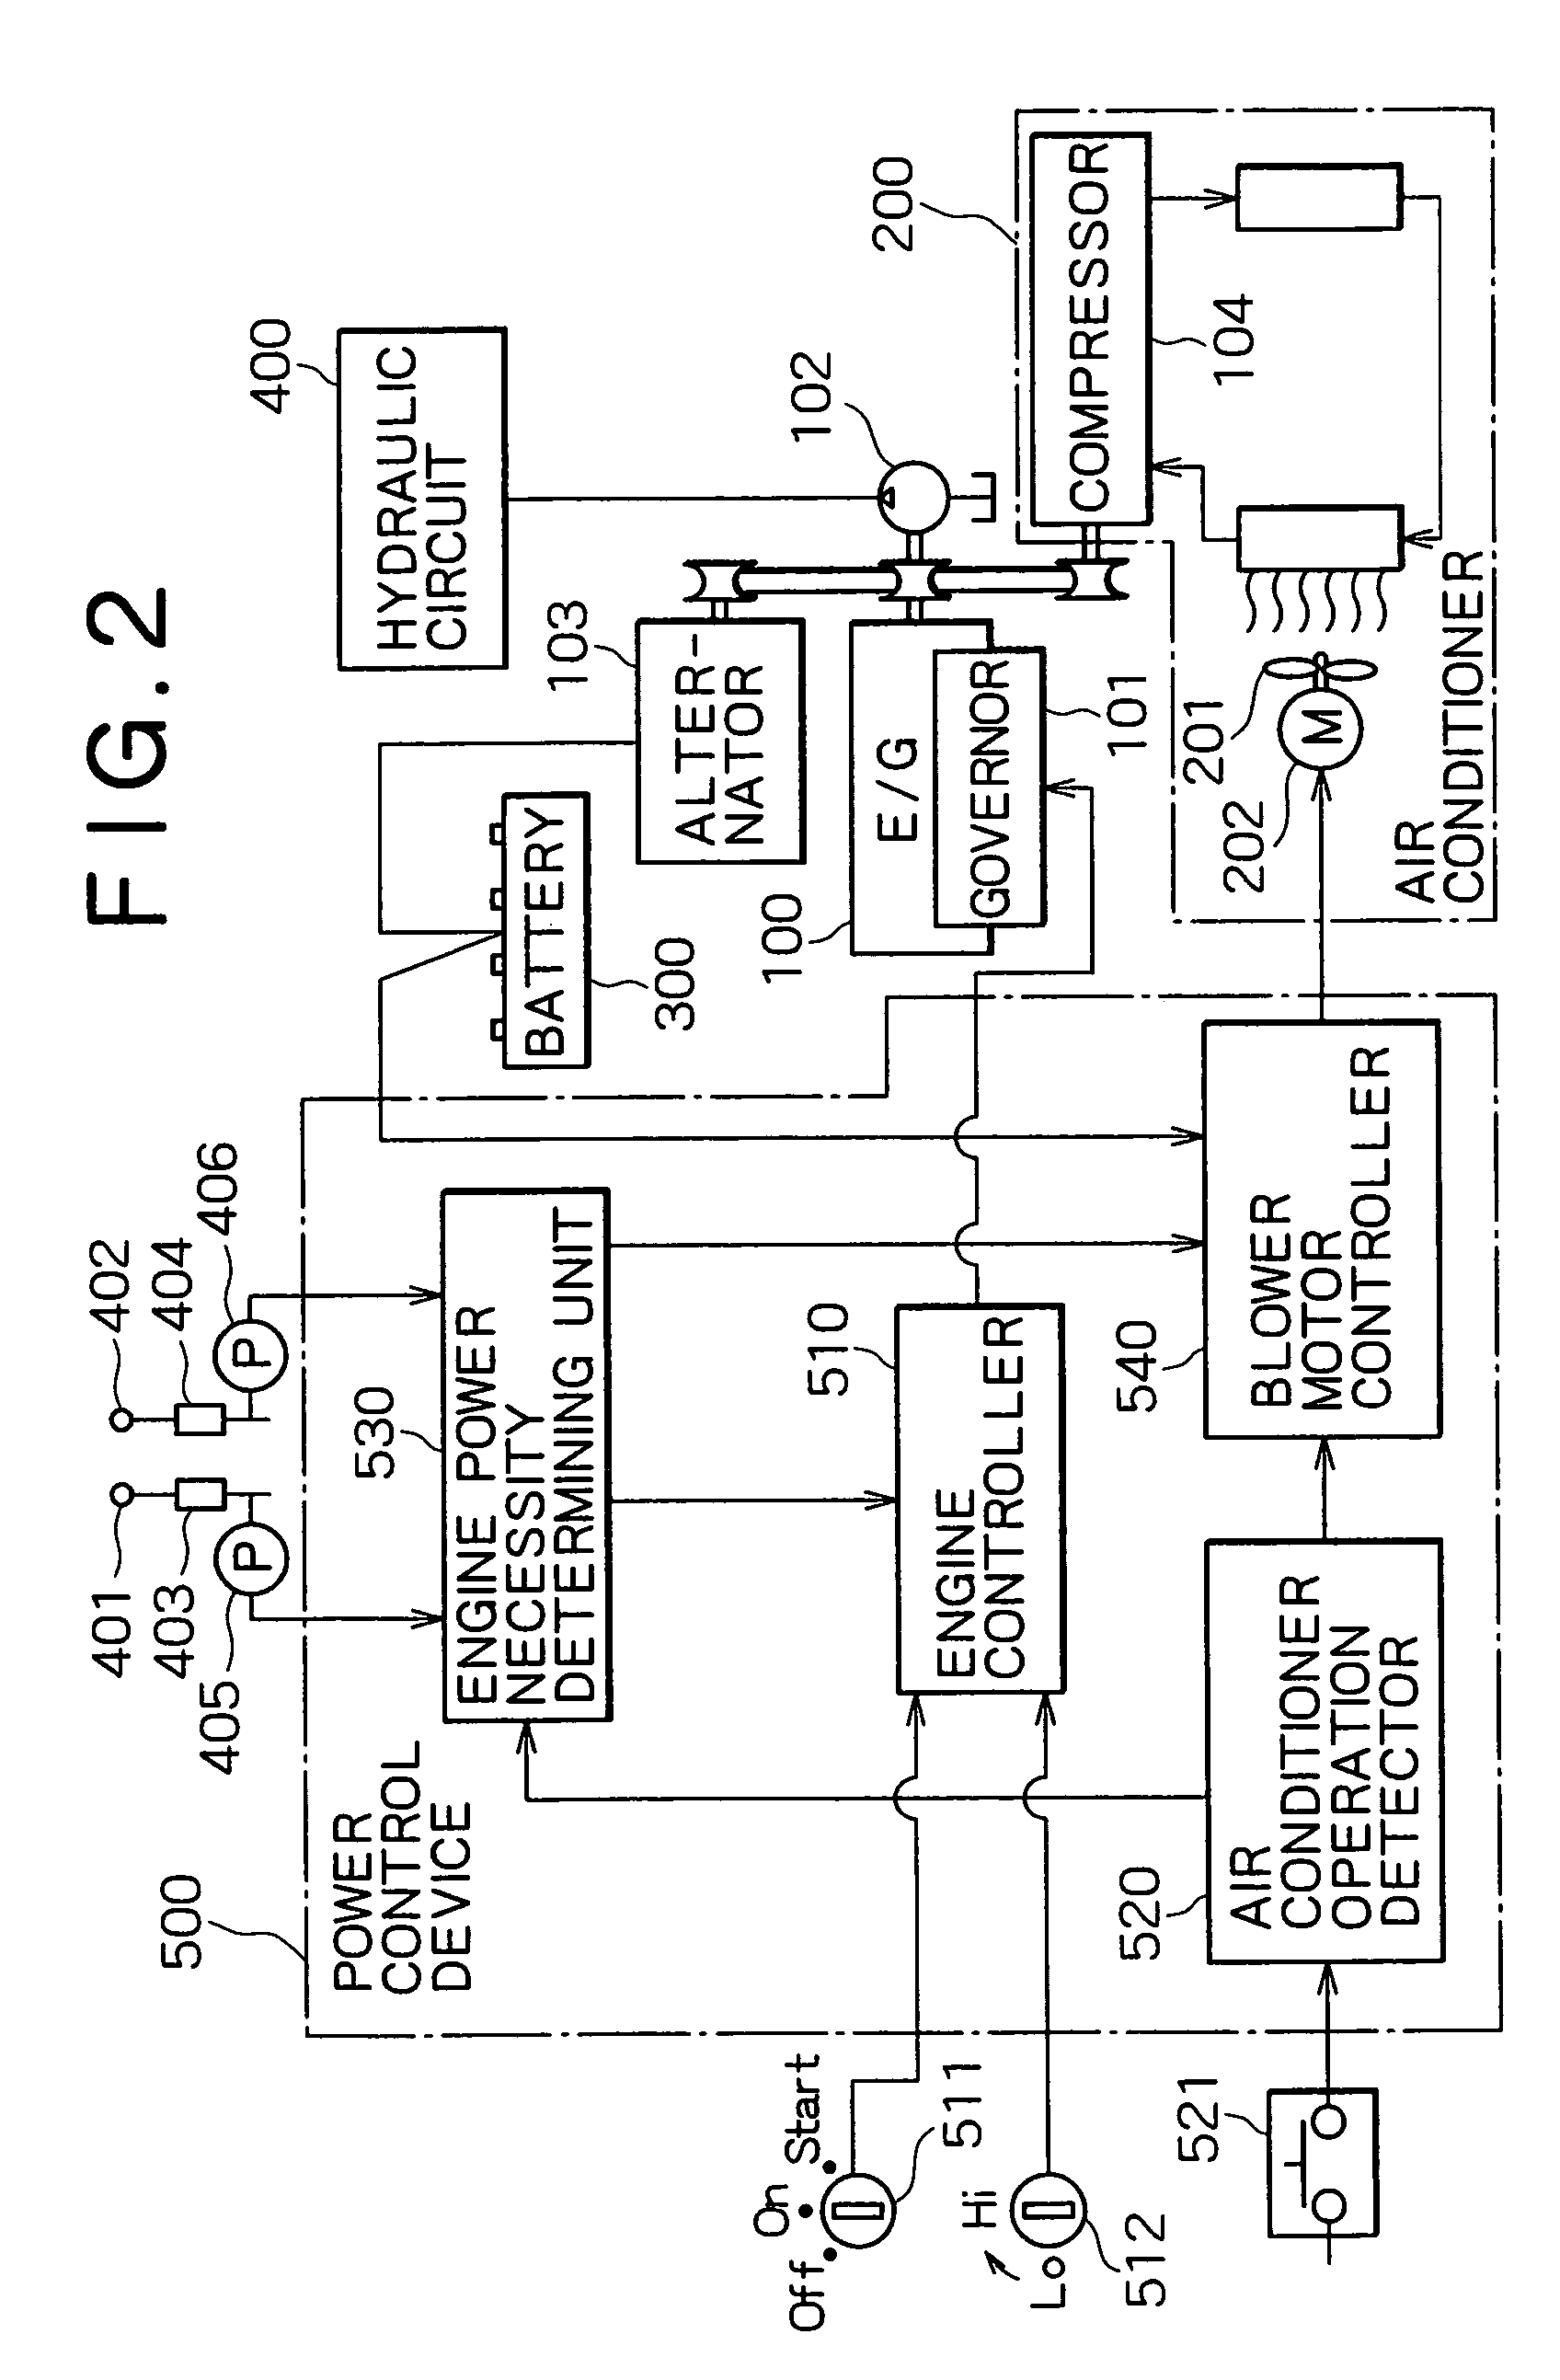 Power control device for construction machine